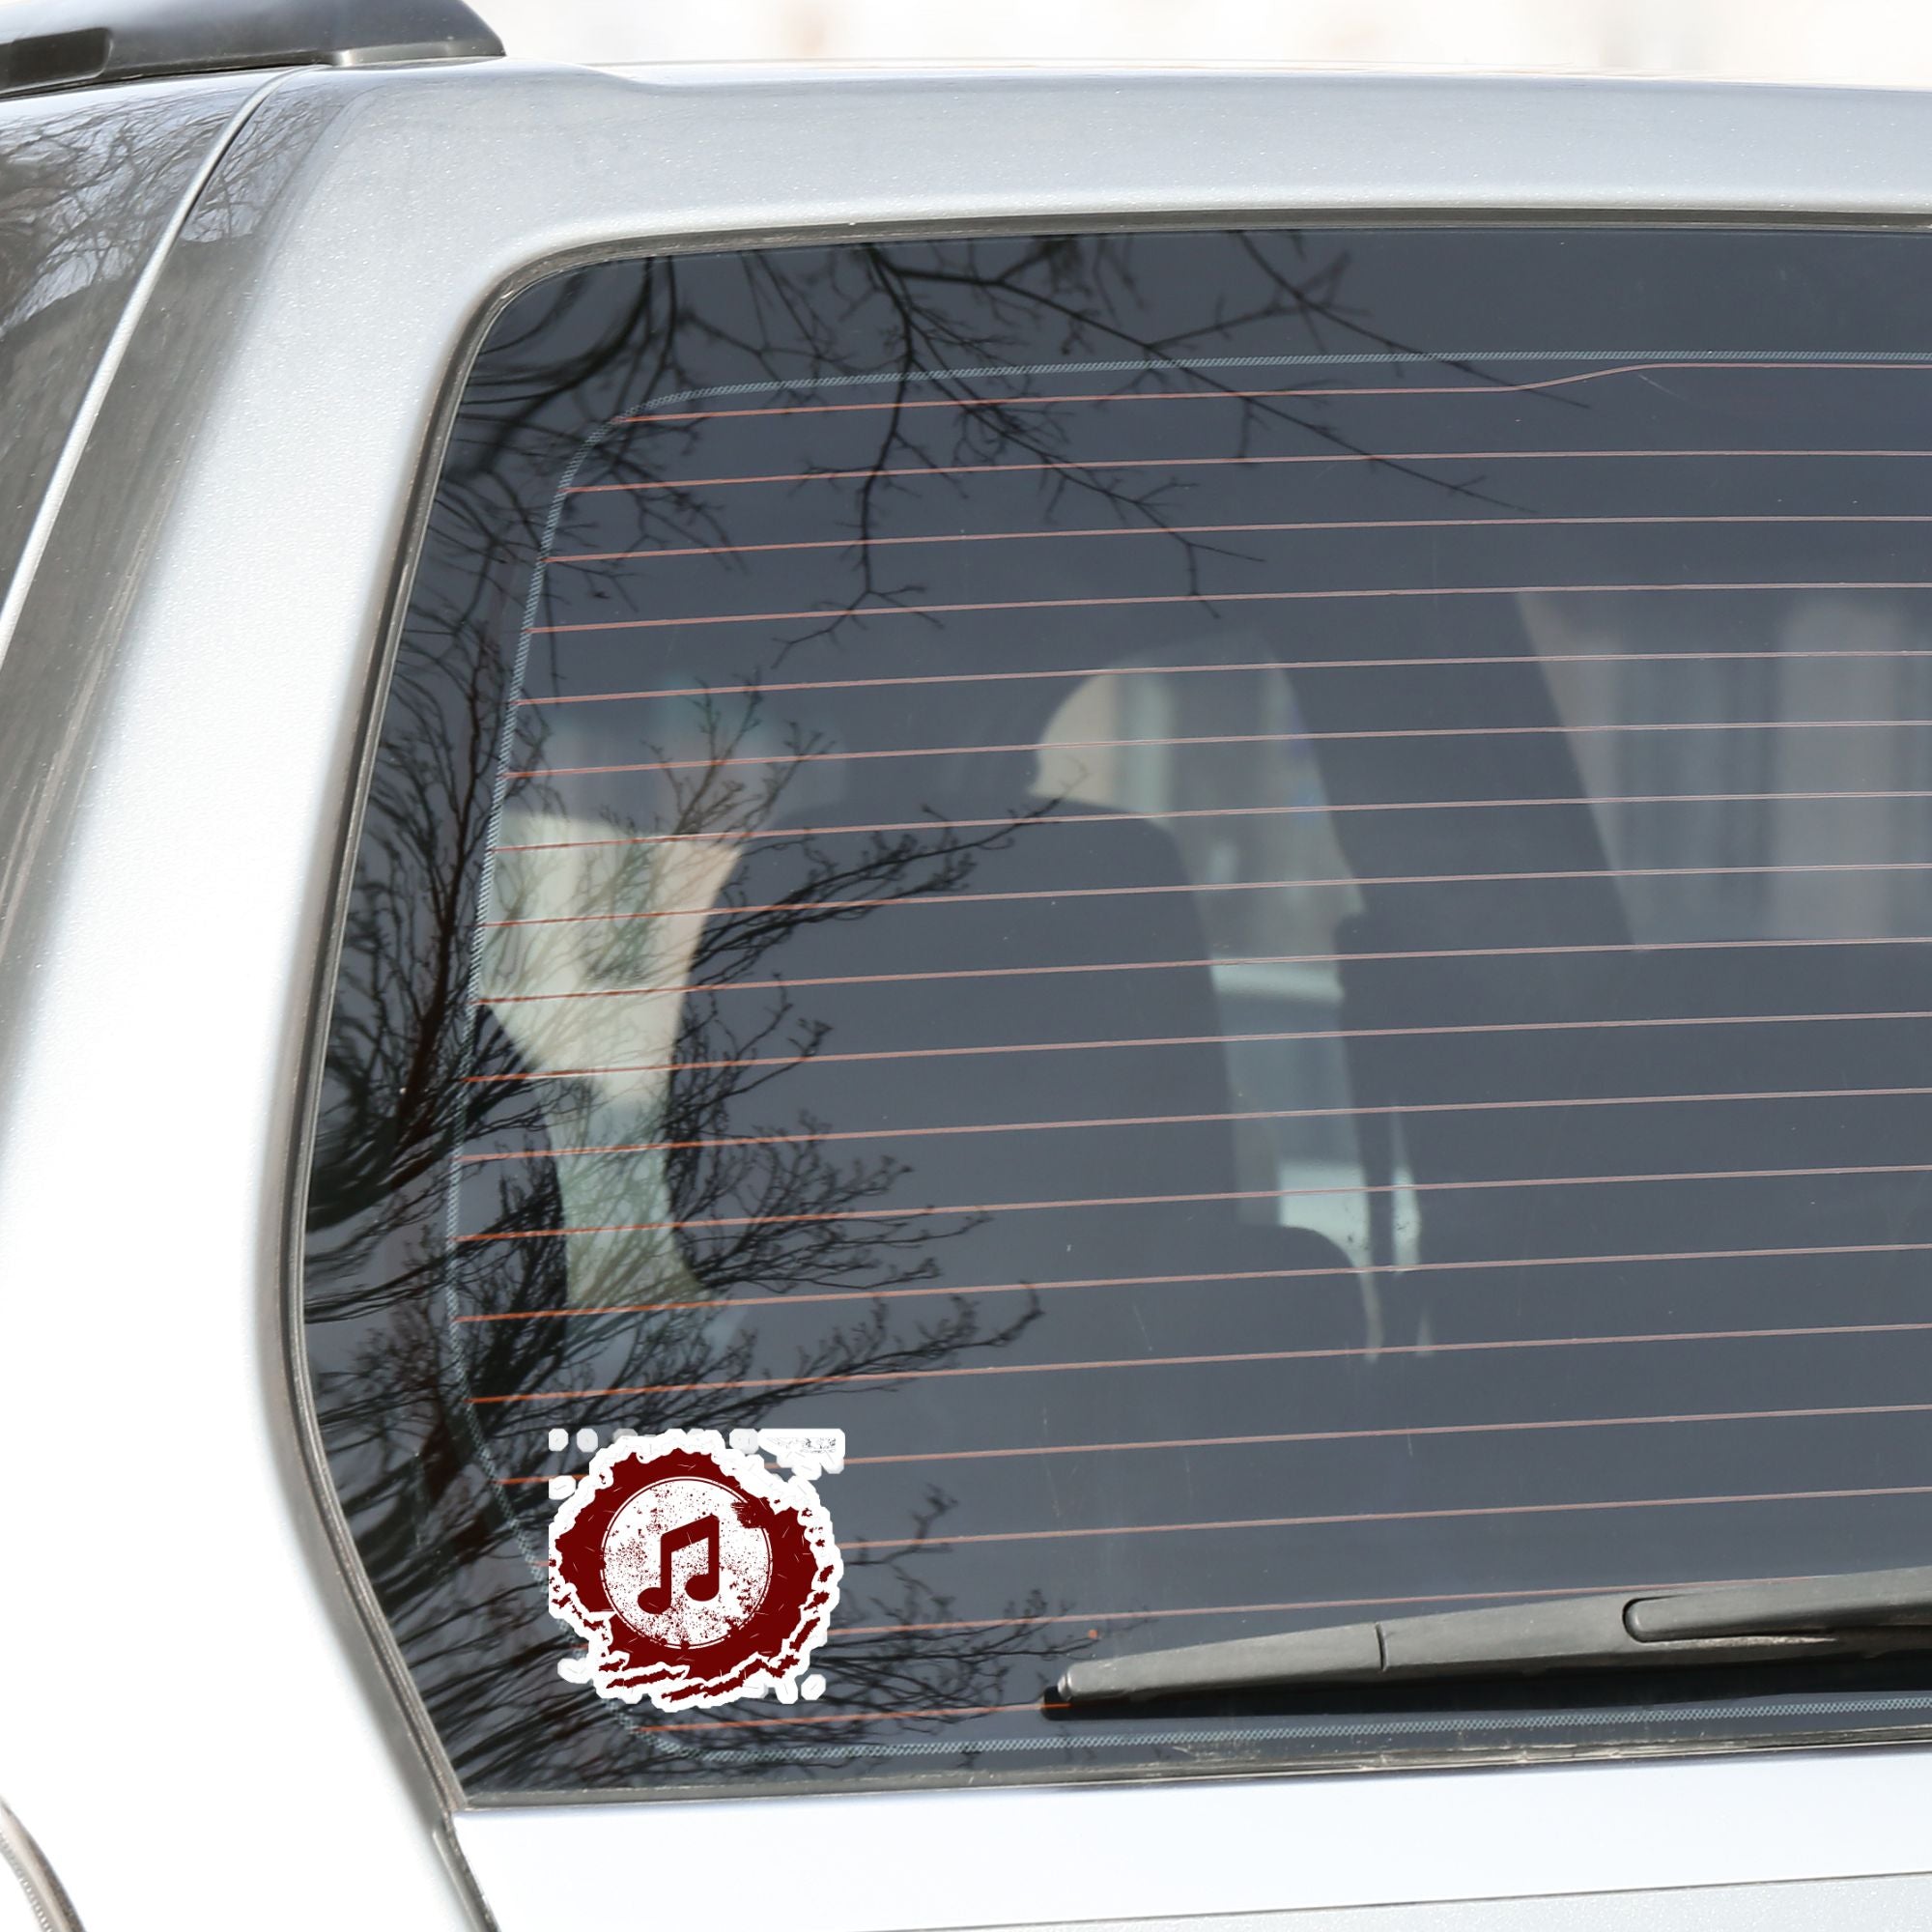 This individual die-cut sticker features a double music note in brown with a paint splattered background. Perfect for performers and music lovers alike! This image shows the music note sticker on the back window of a car.